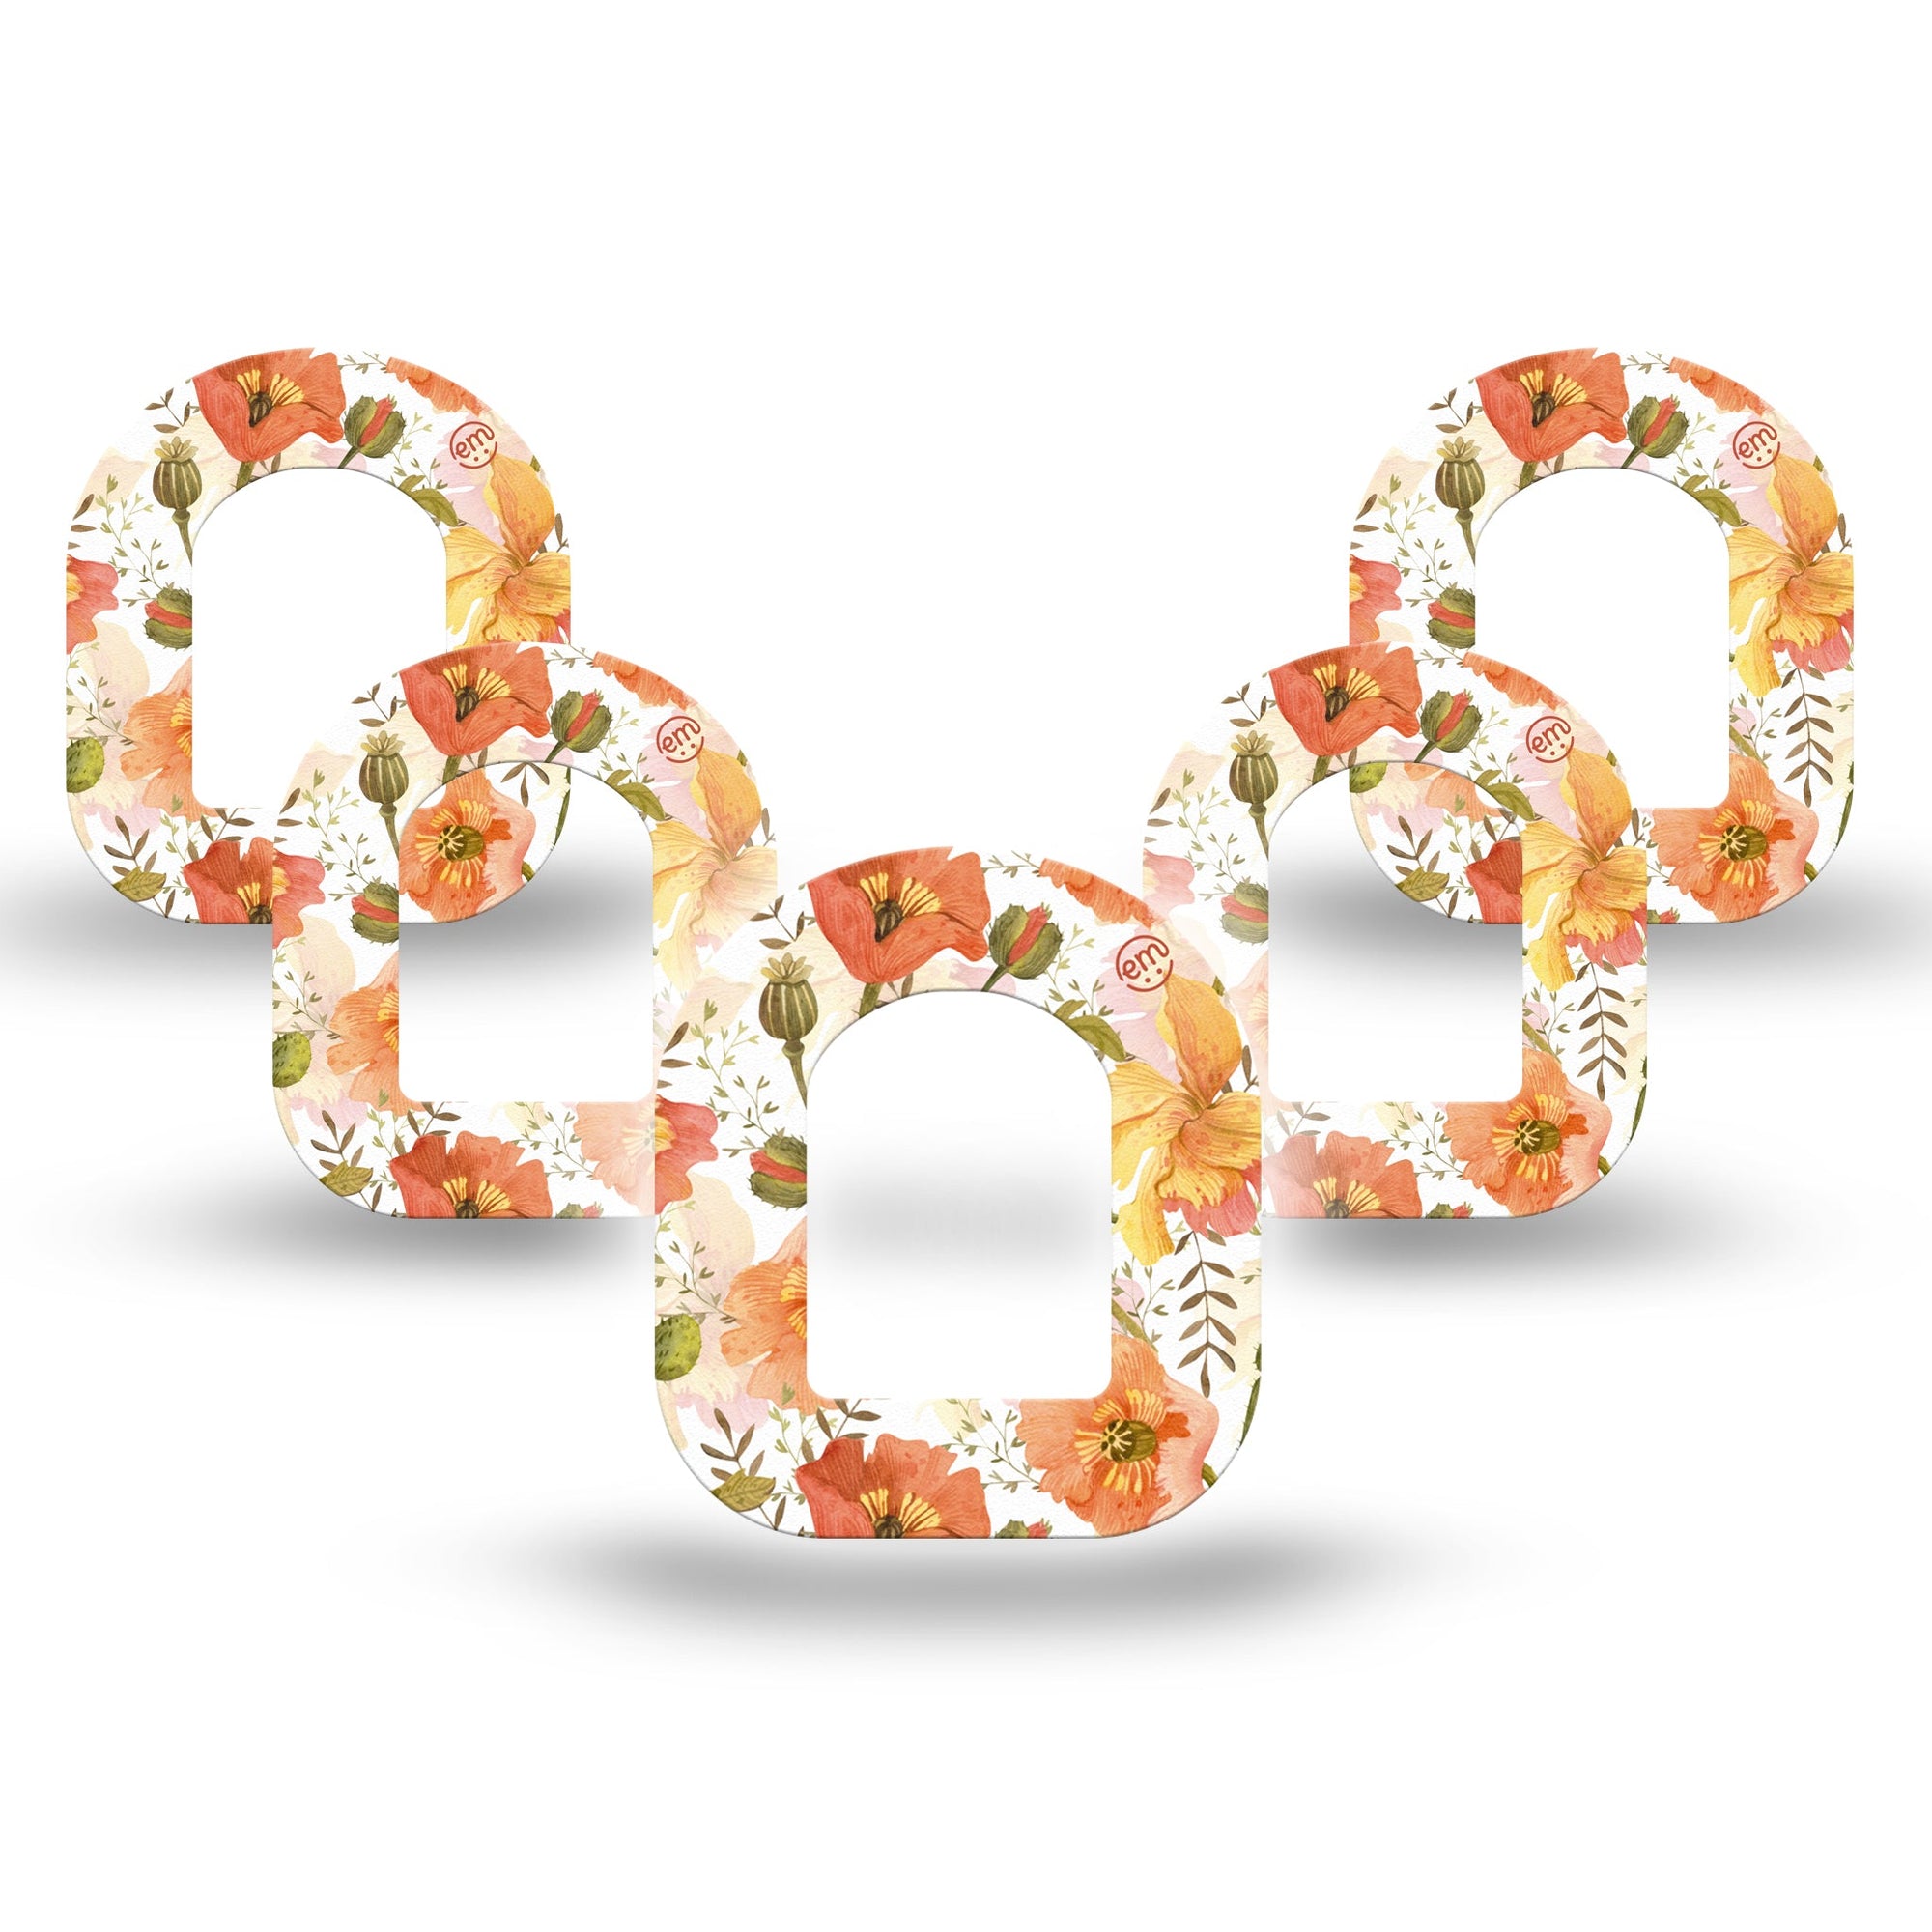 ExpressionMed Peachy Blooms Pod Mini Tape 5-Pack, Delicate Blossoms Adhesive Tape Pump Design